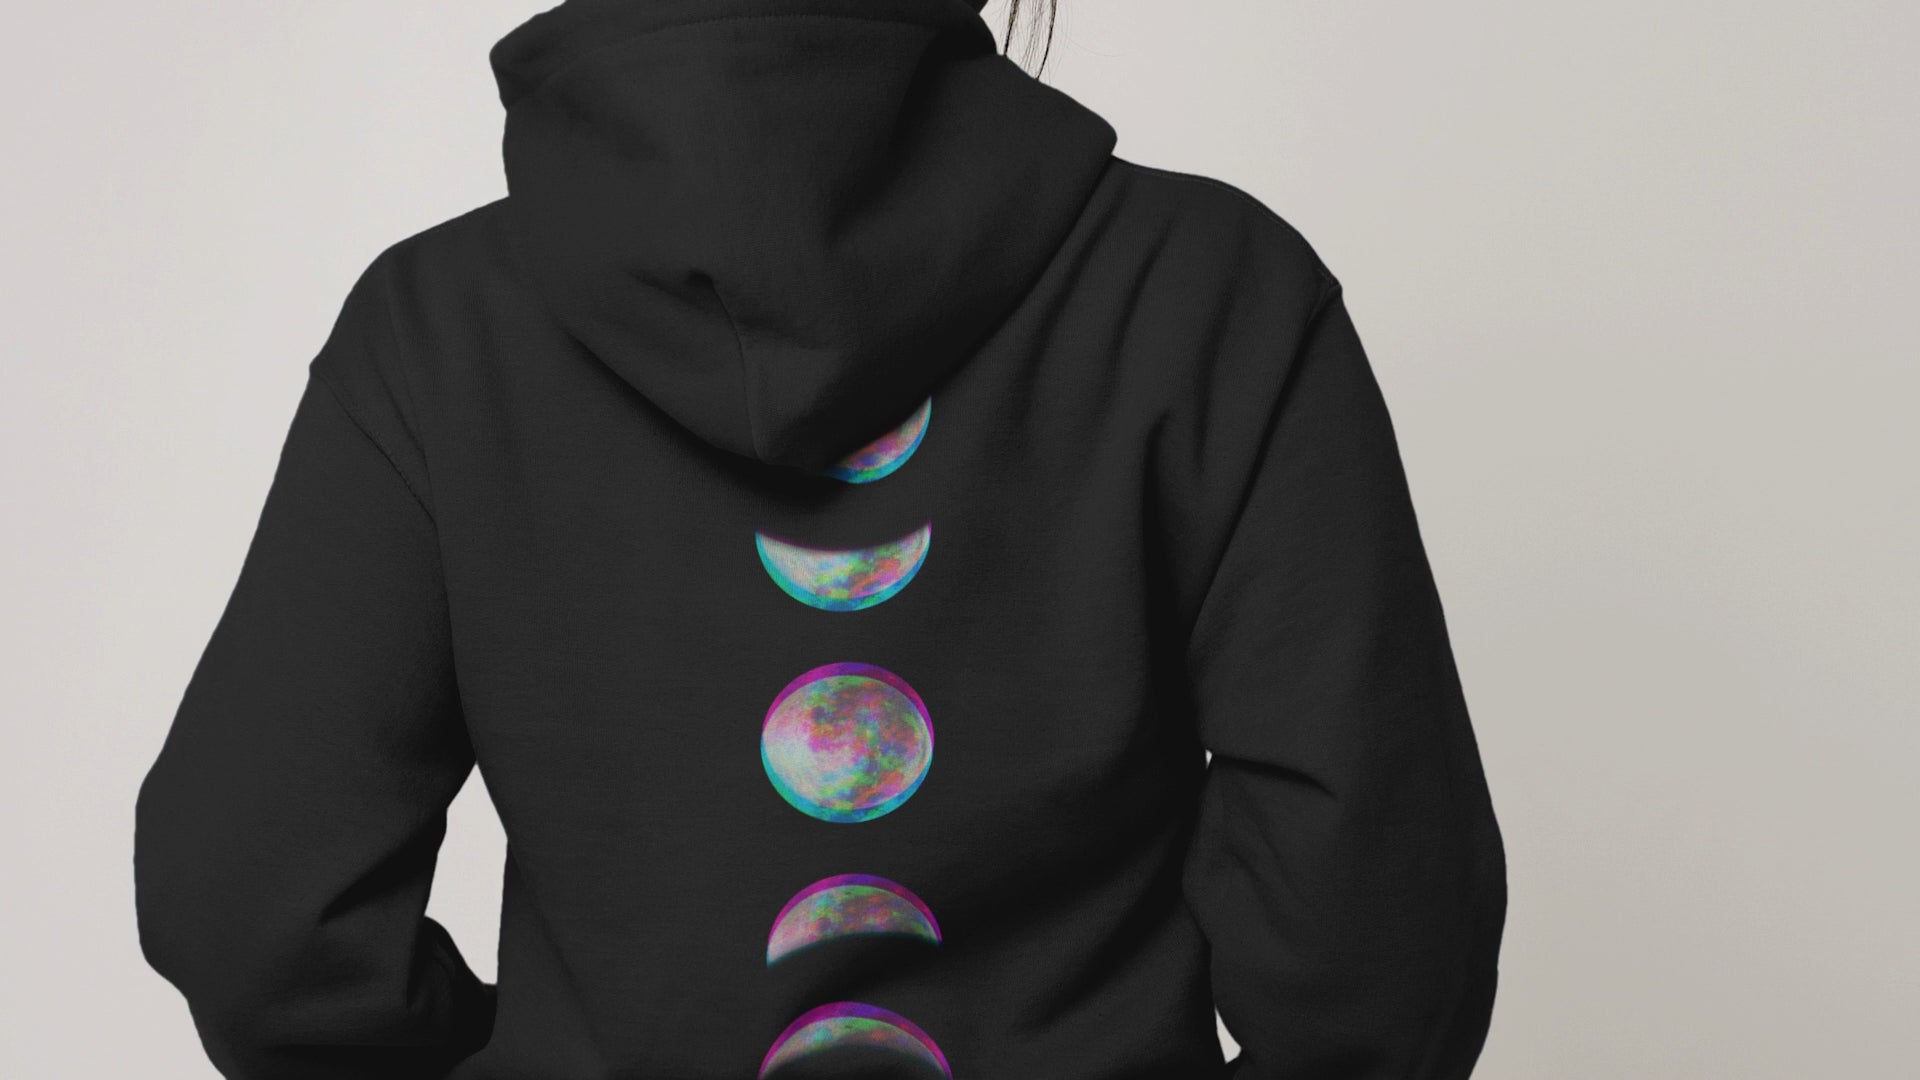 Witchy Aesthetic Plus Size Clothing Glitch Moon Phase Zip Up Hoodie